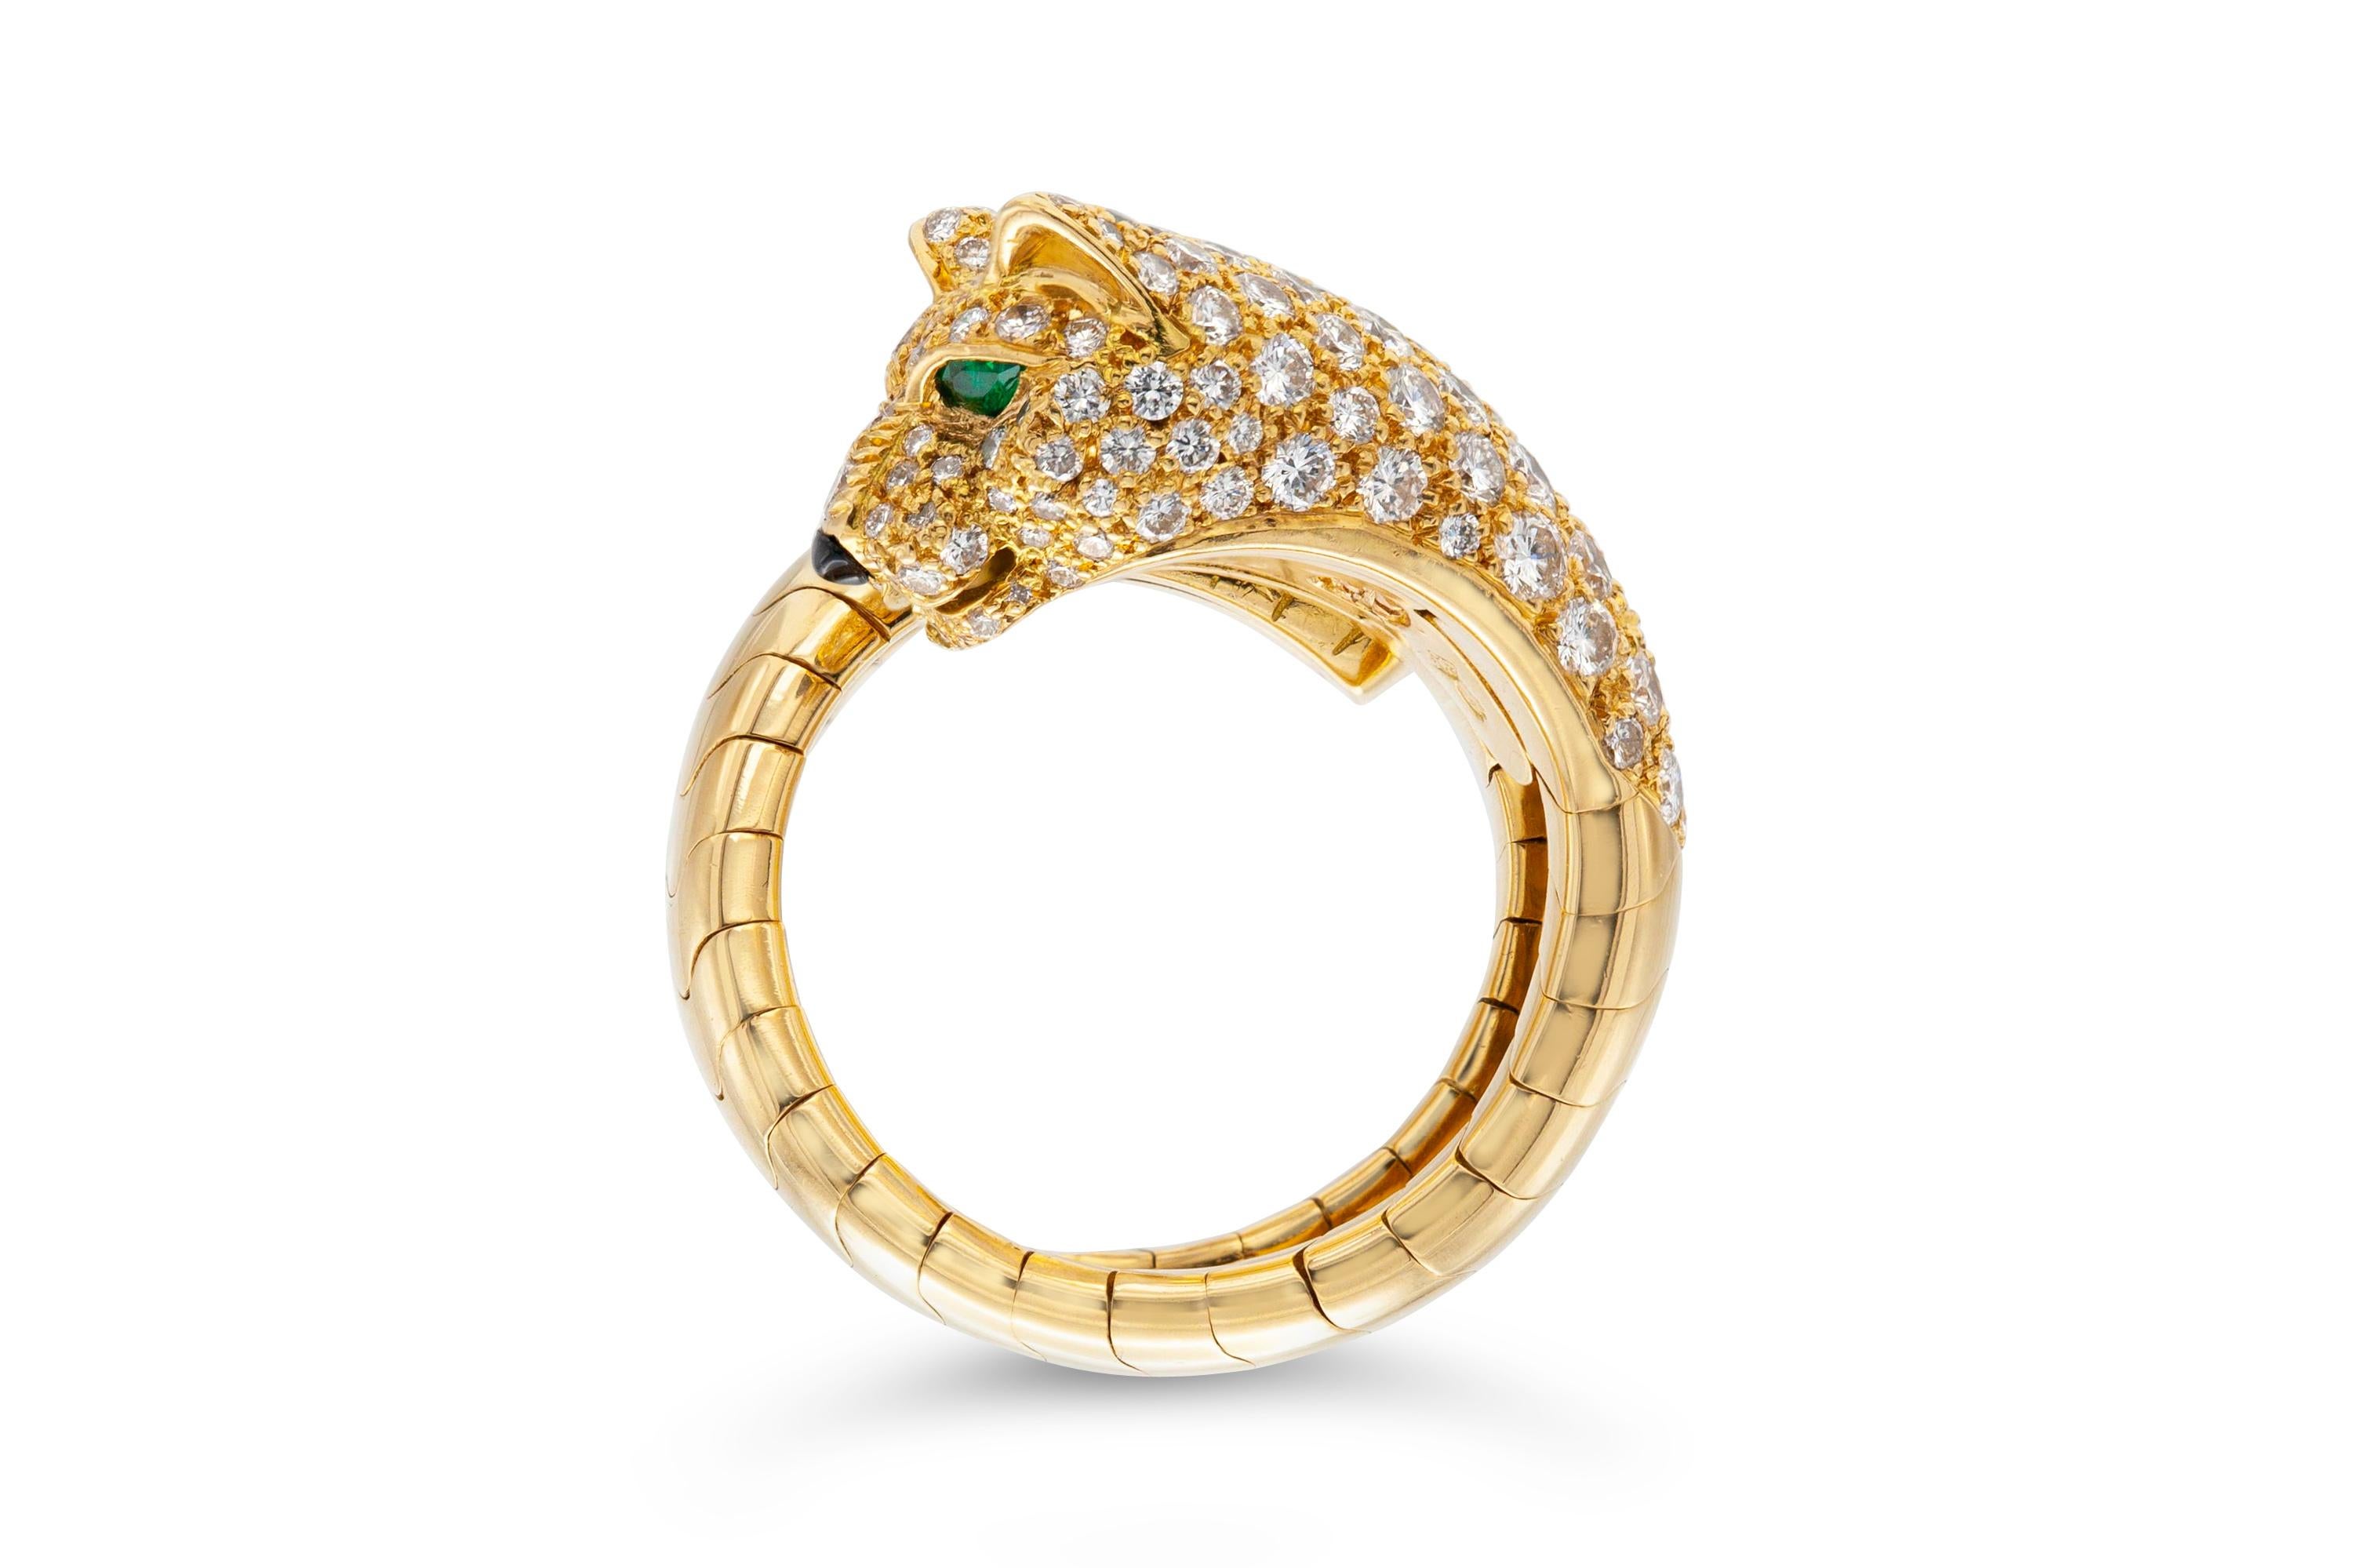 Finely crafted in 18K yellow gold featuring round-brilliant cut diamonds half way around weighing 2.07 carats, as well as two emerald eyes and a black onyx nose. 
Size 50, flexible. Not resizable. 
Singed and numbered by Cartier, from their Panthere